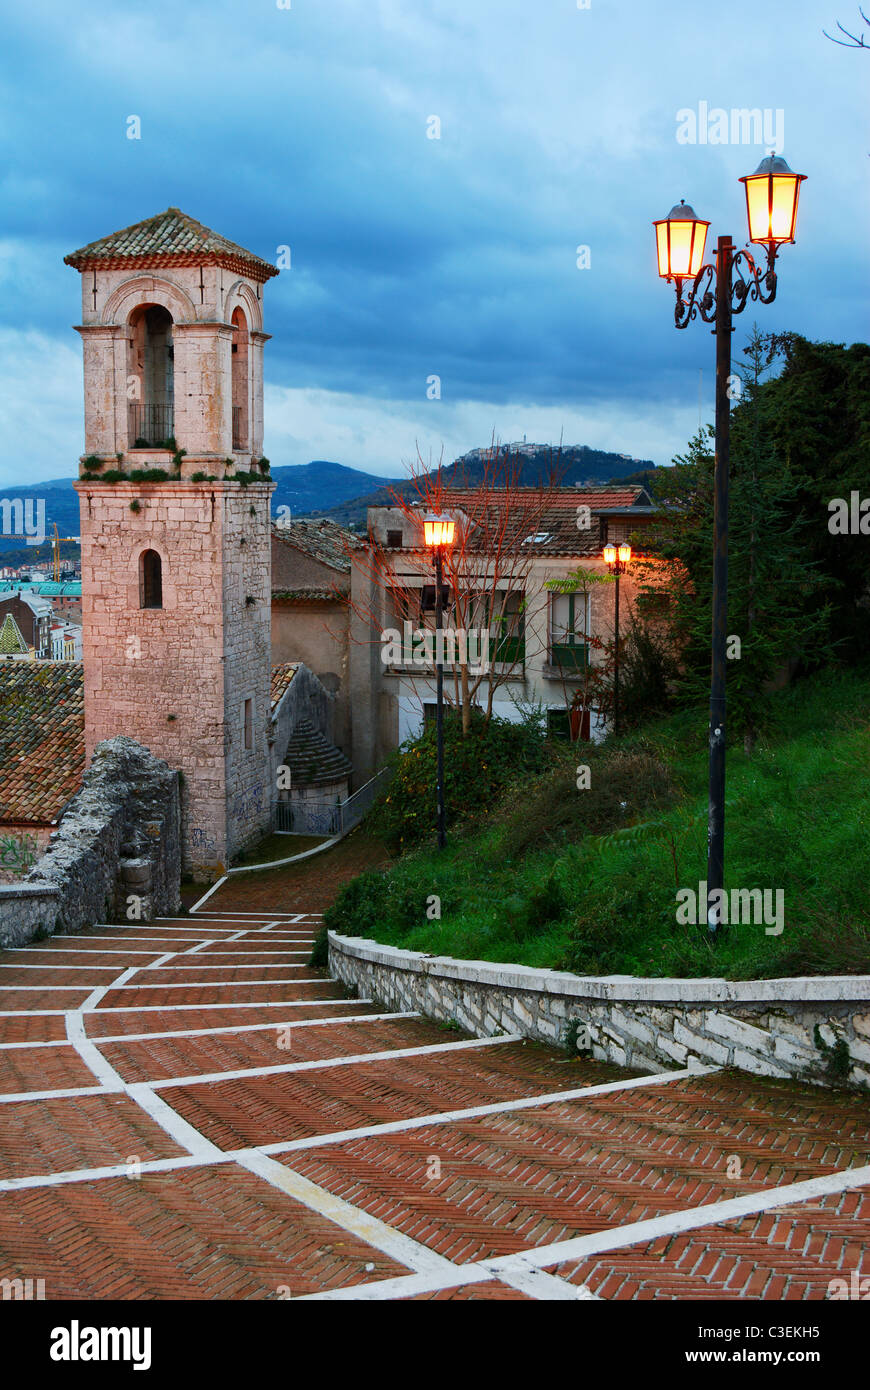 Stairway and staple in the old town of Campobasso in center Italy Stock Photo